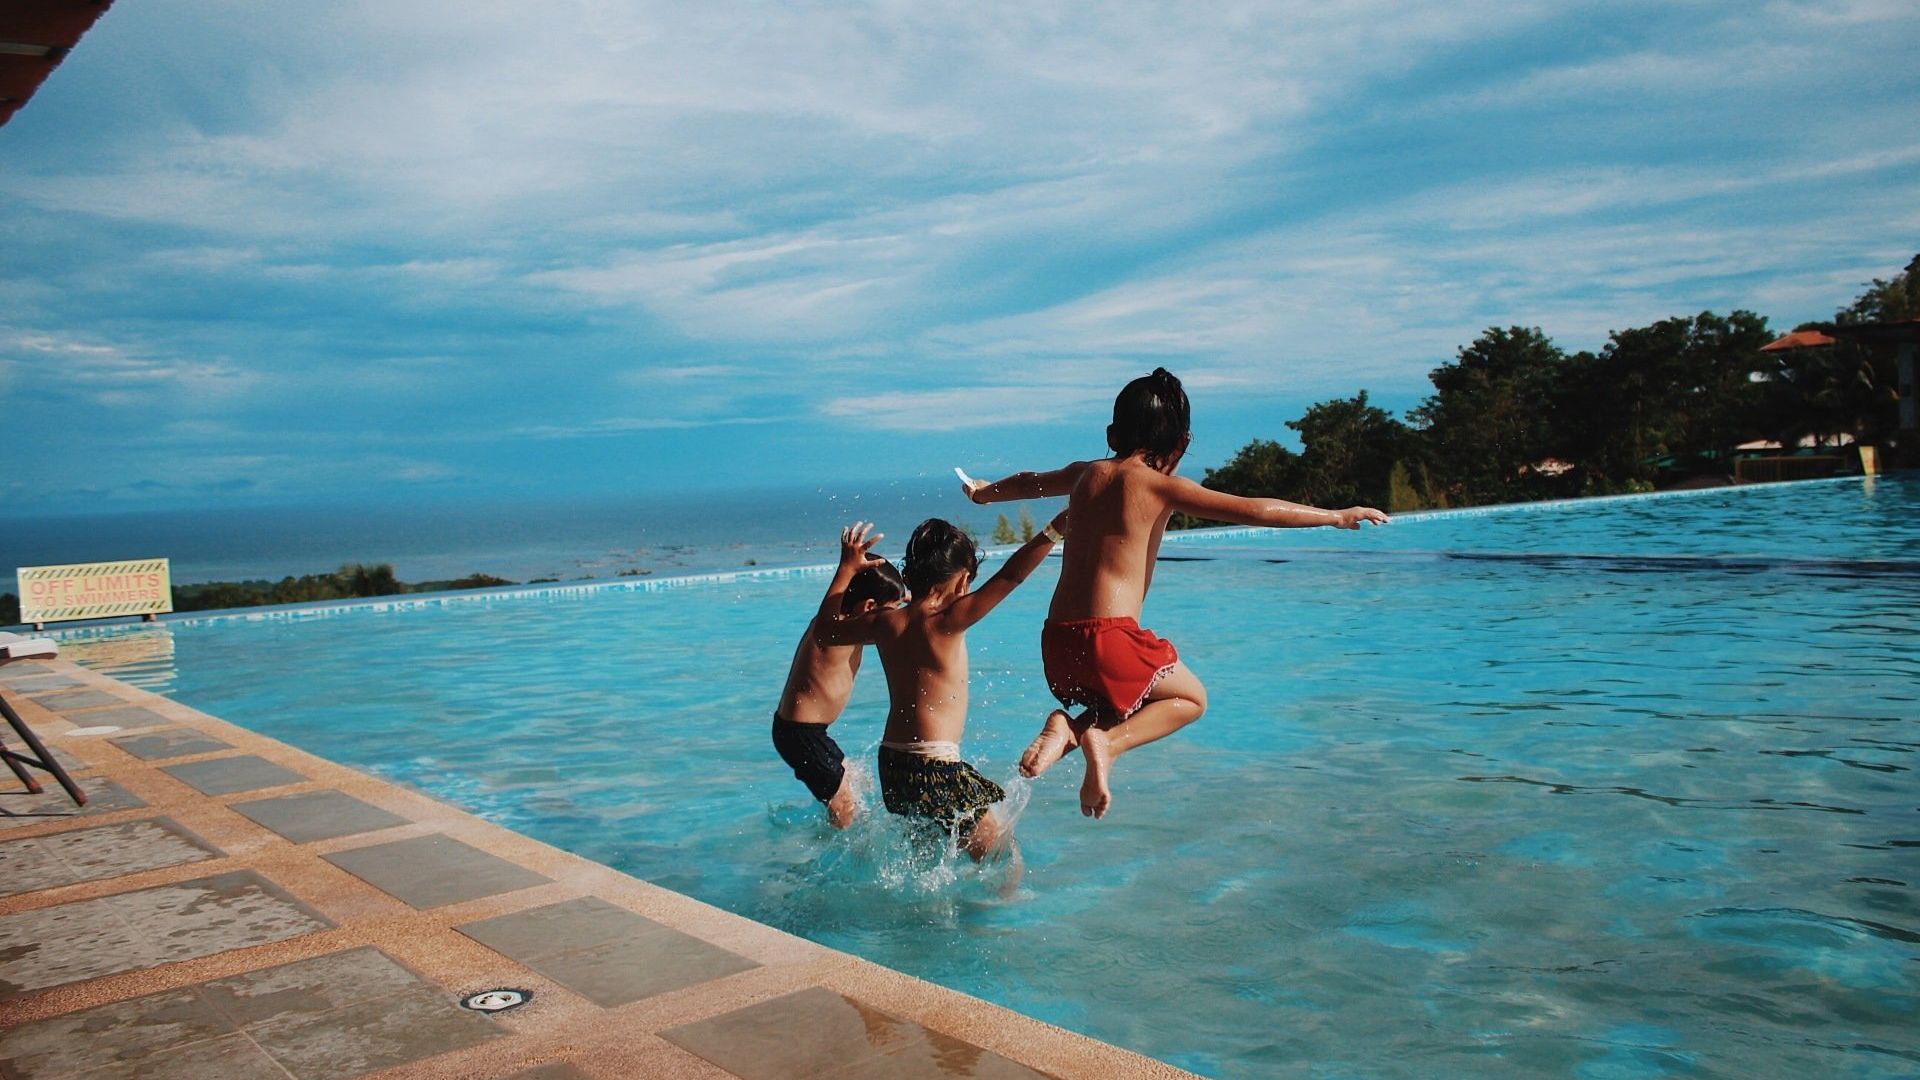 Kids jumping on the pool